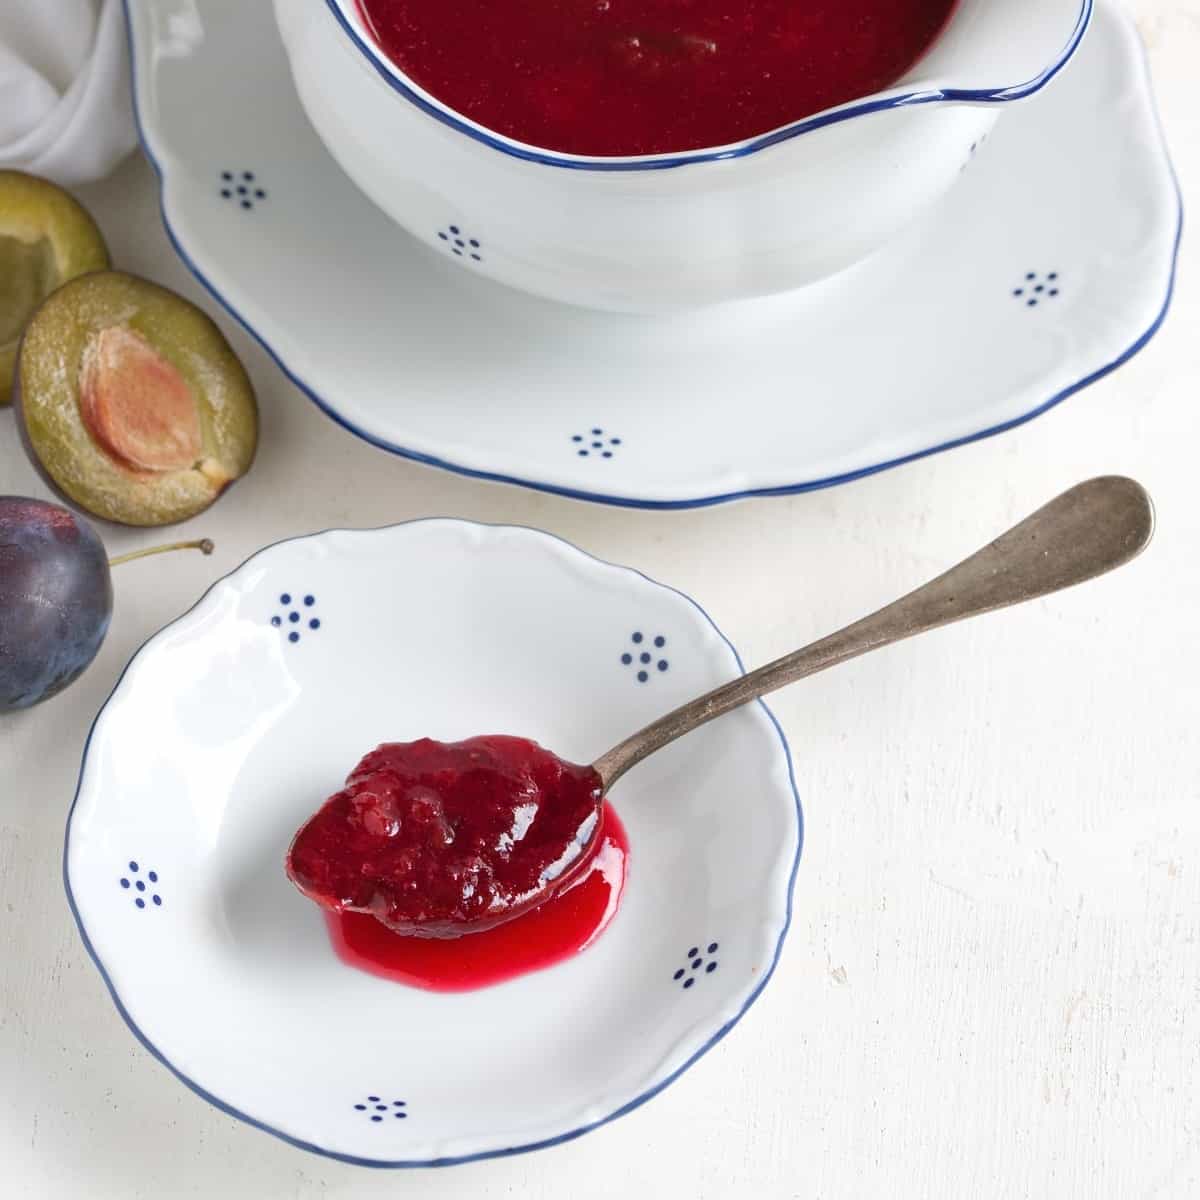 A spoon of plum compote put on a small plate.